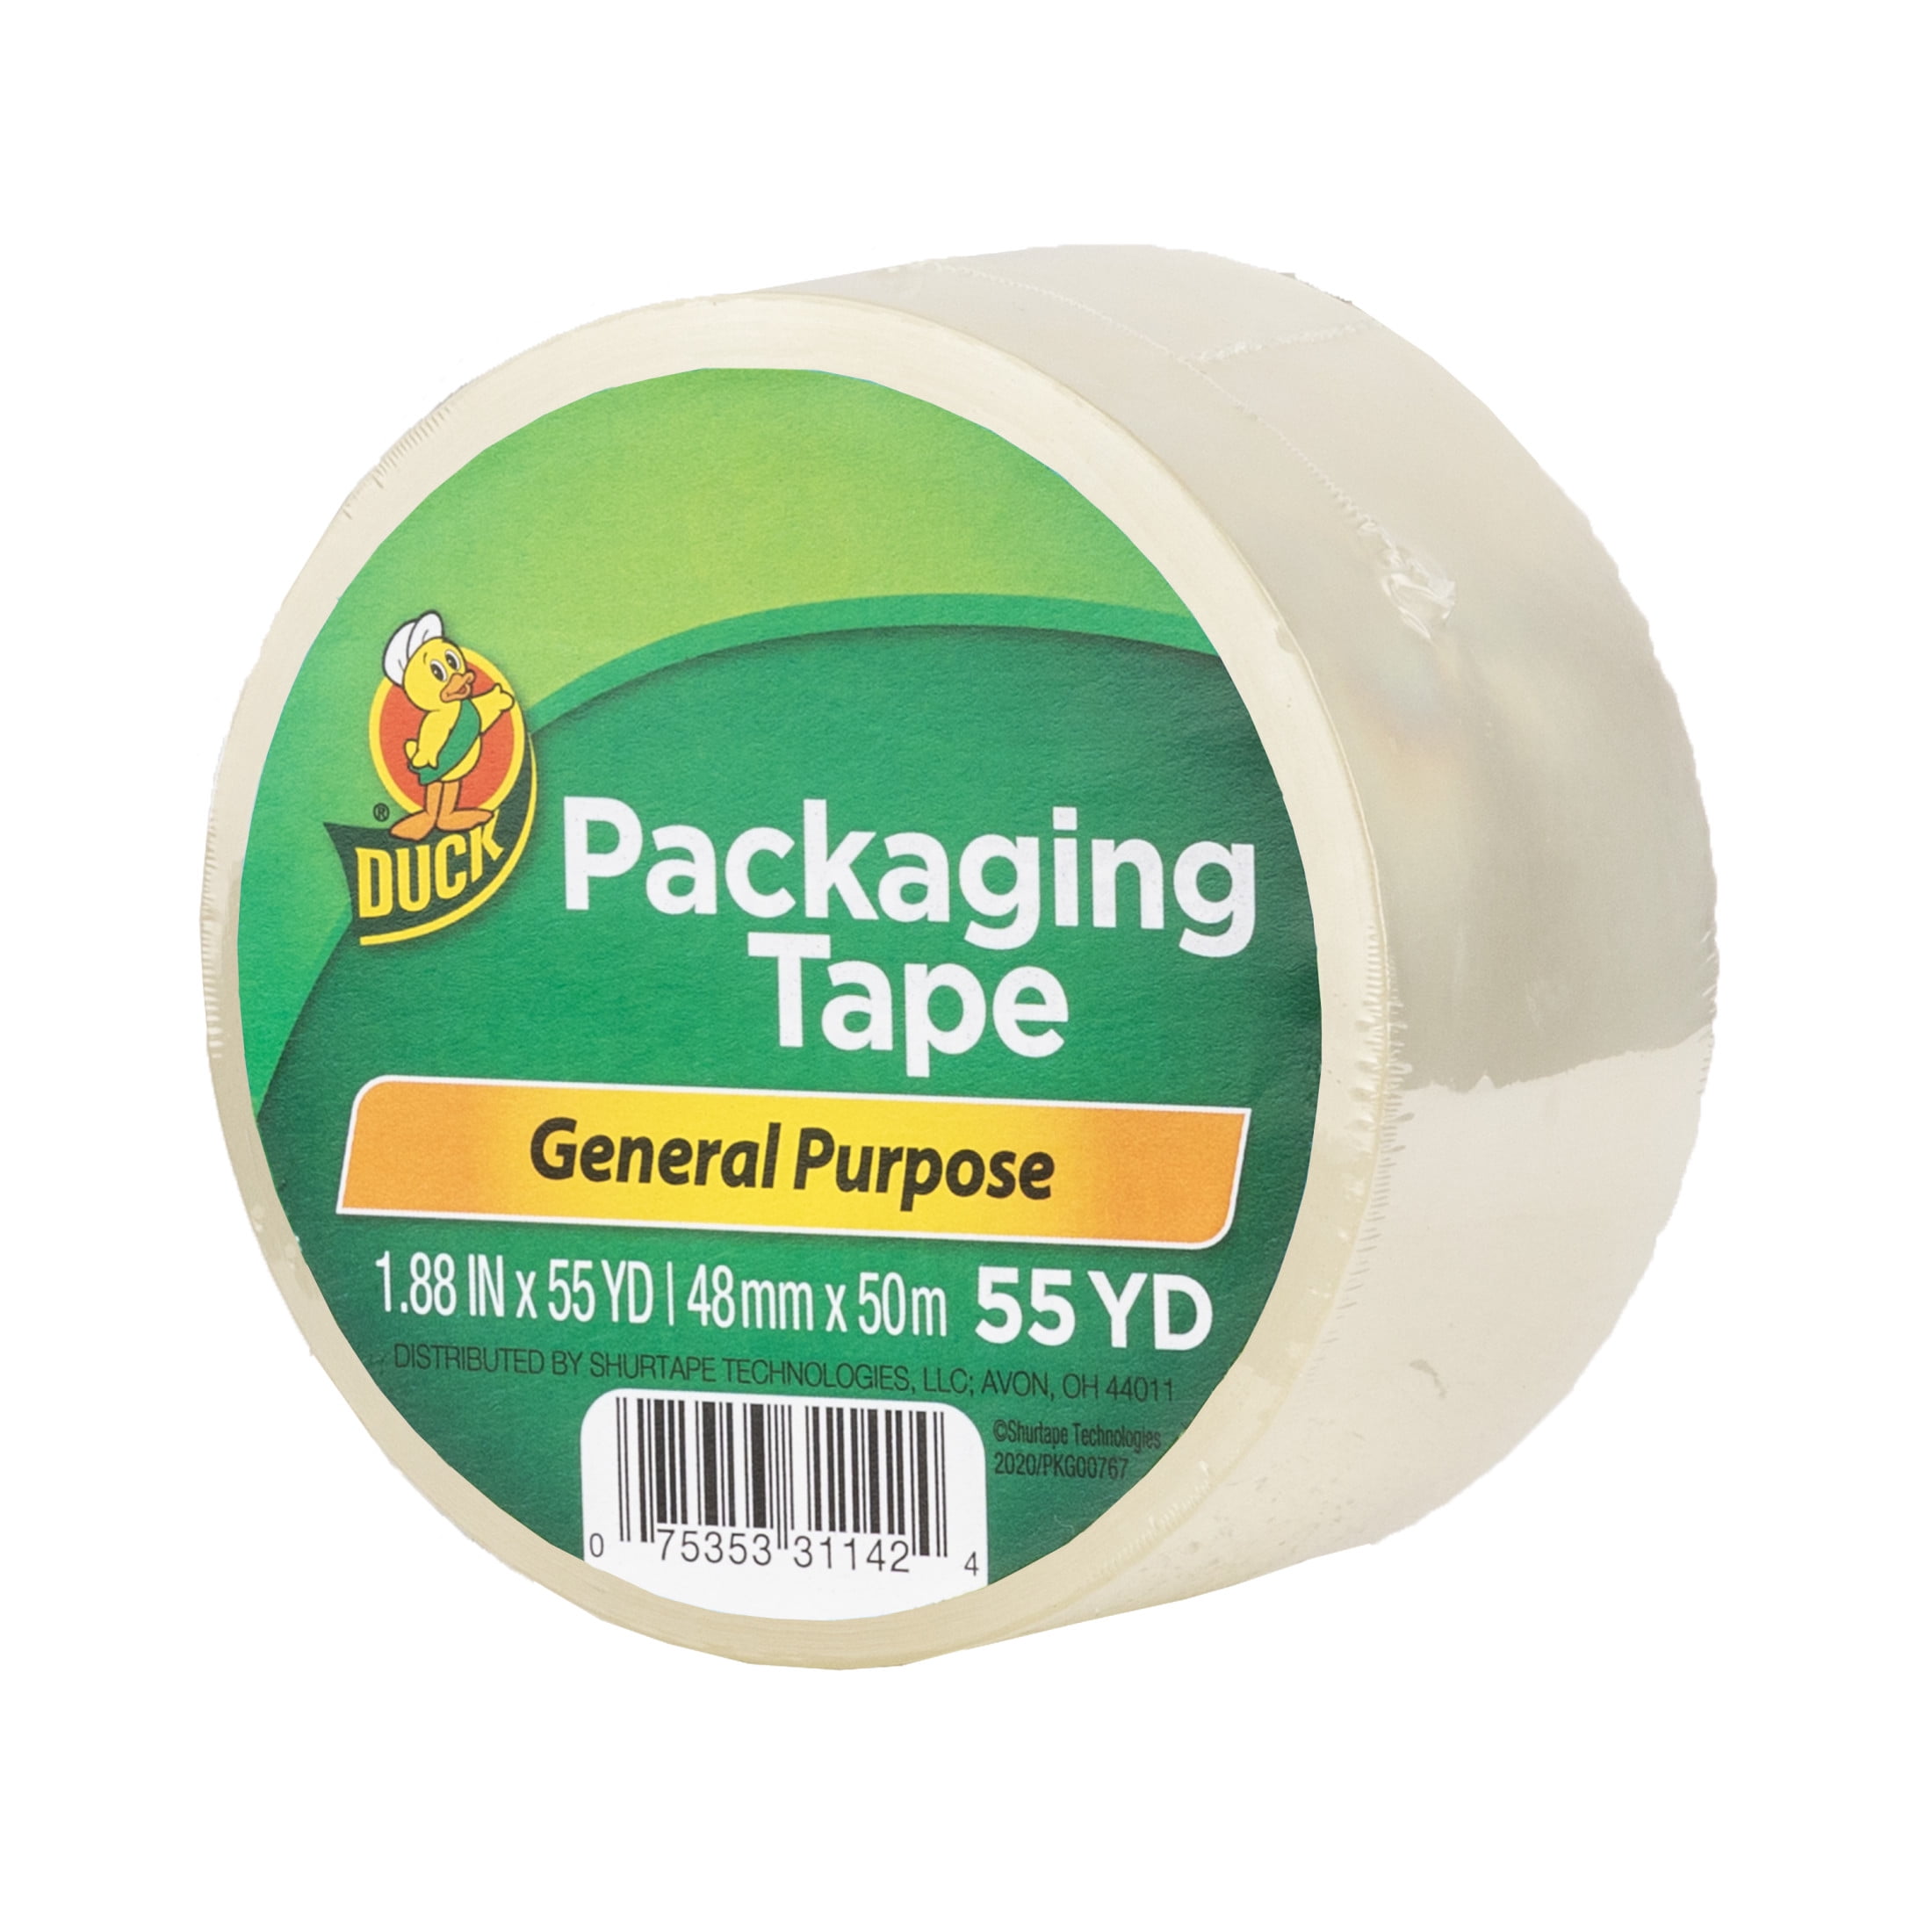 CG-4035 1 INCH - TAPE, LABELING, GENERAL PURPOSE, 1 INCH WIDE x